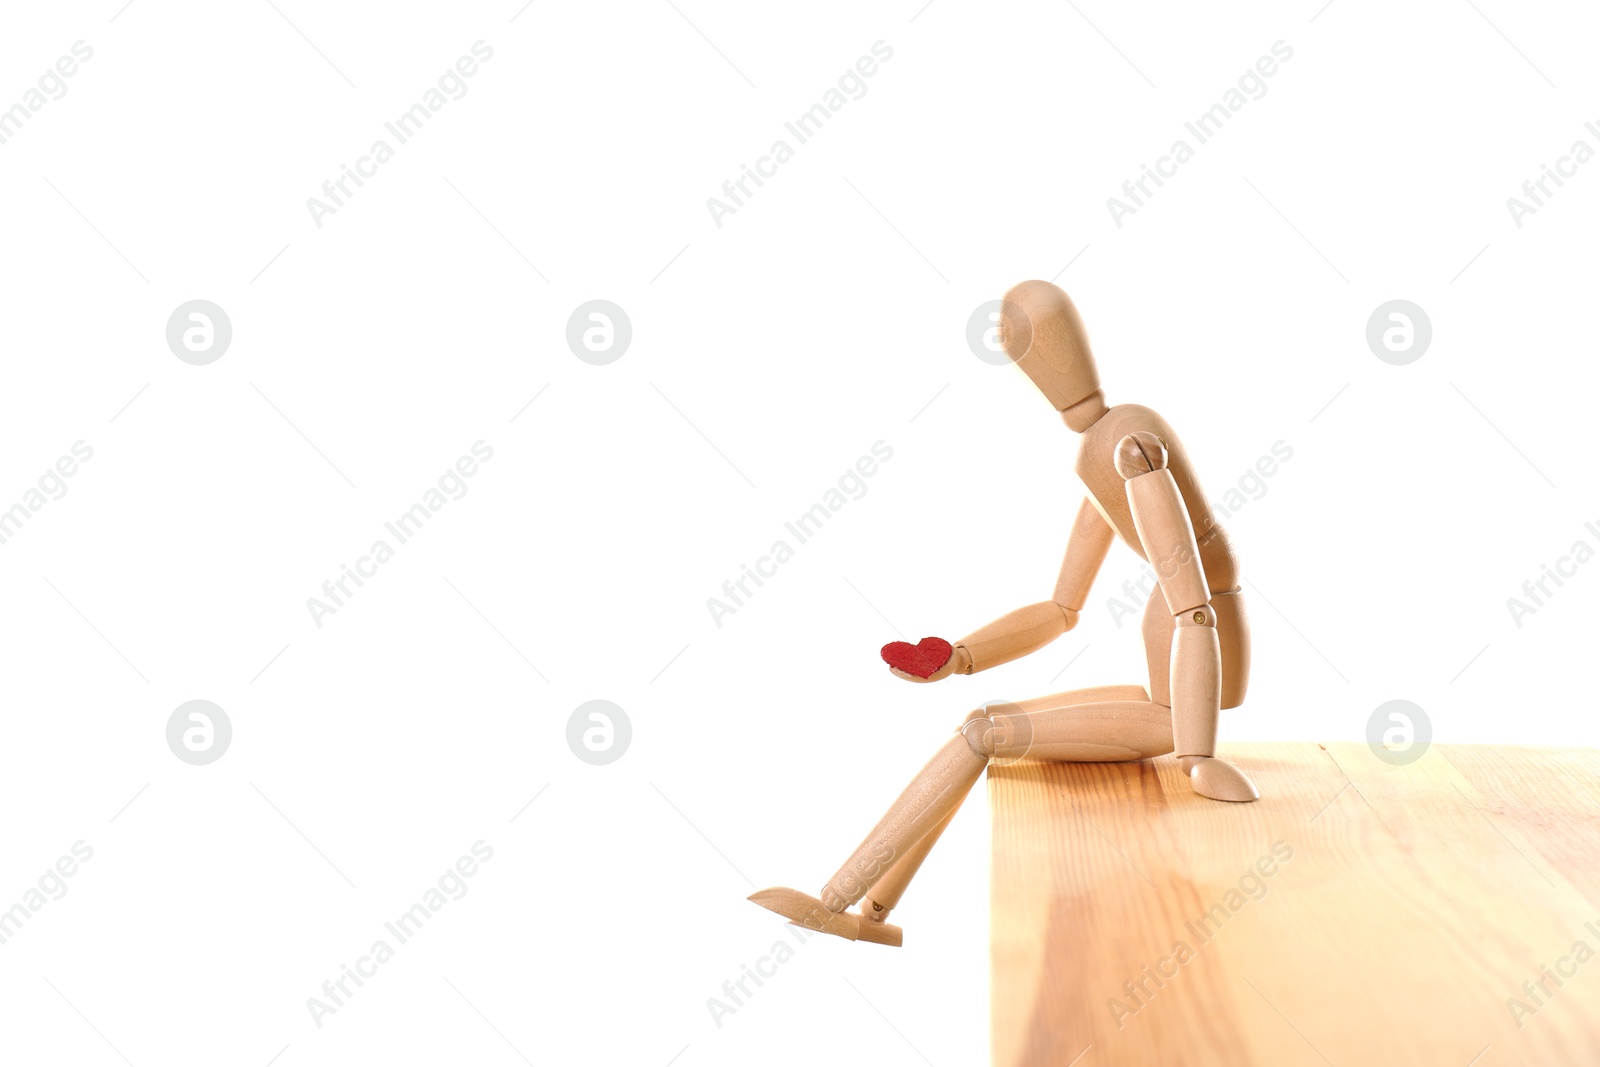 Photo of Wooden puppet with small heart sitting on table against white background. Relationship problems